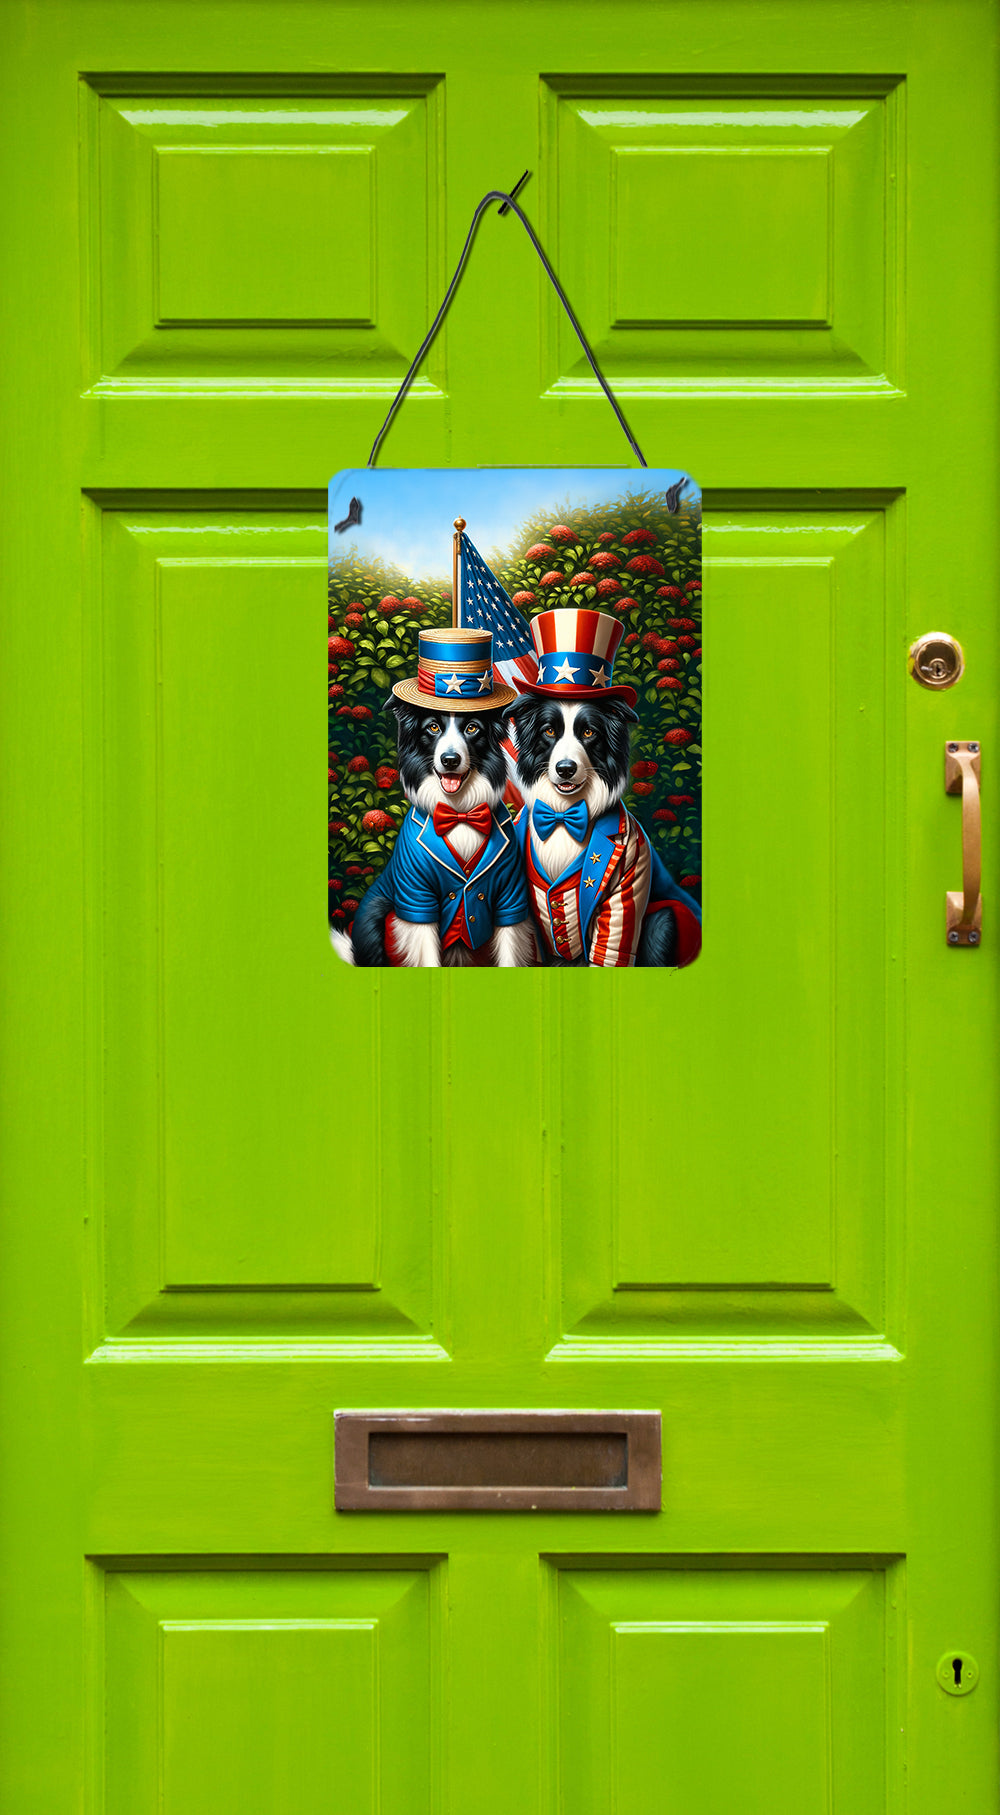 Buy this All American Border Collie Wall or Door Hanging Prints